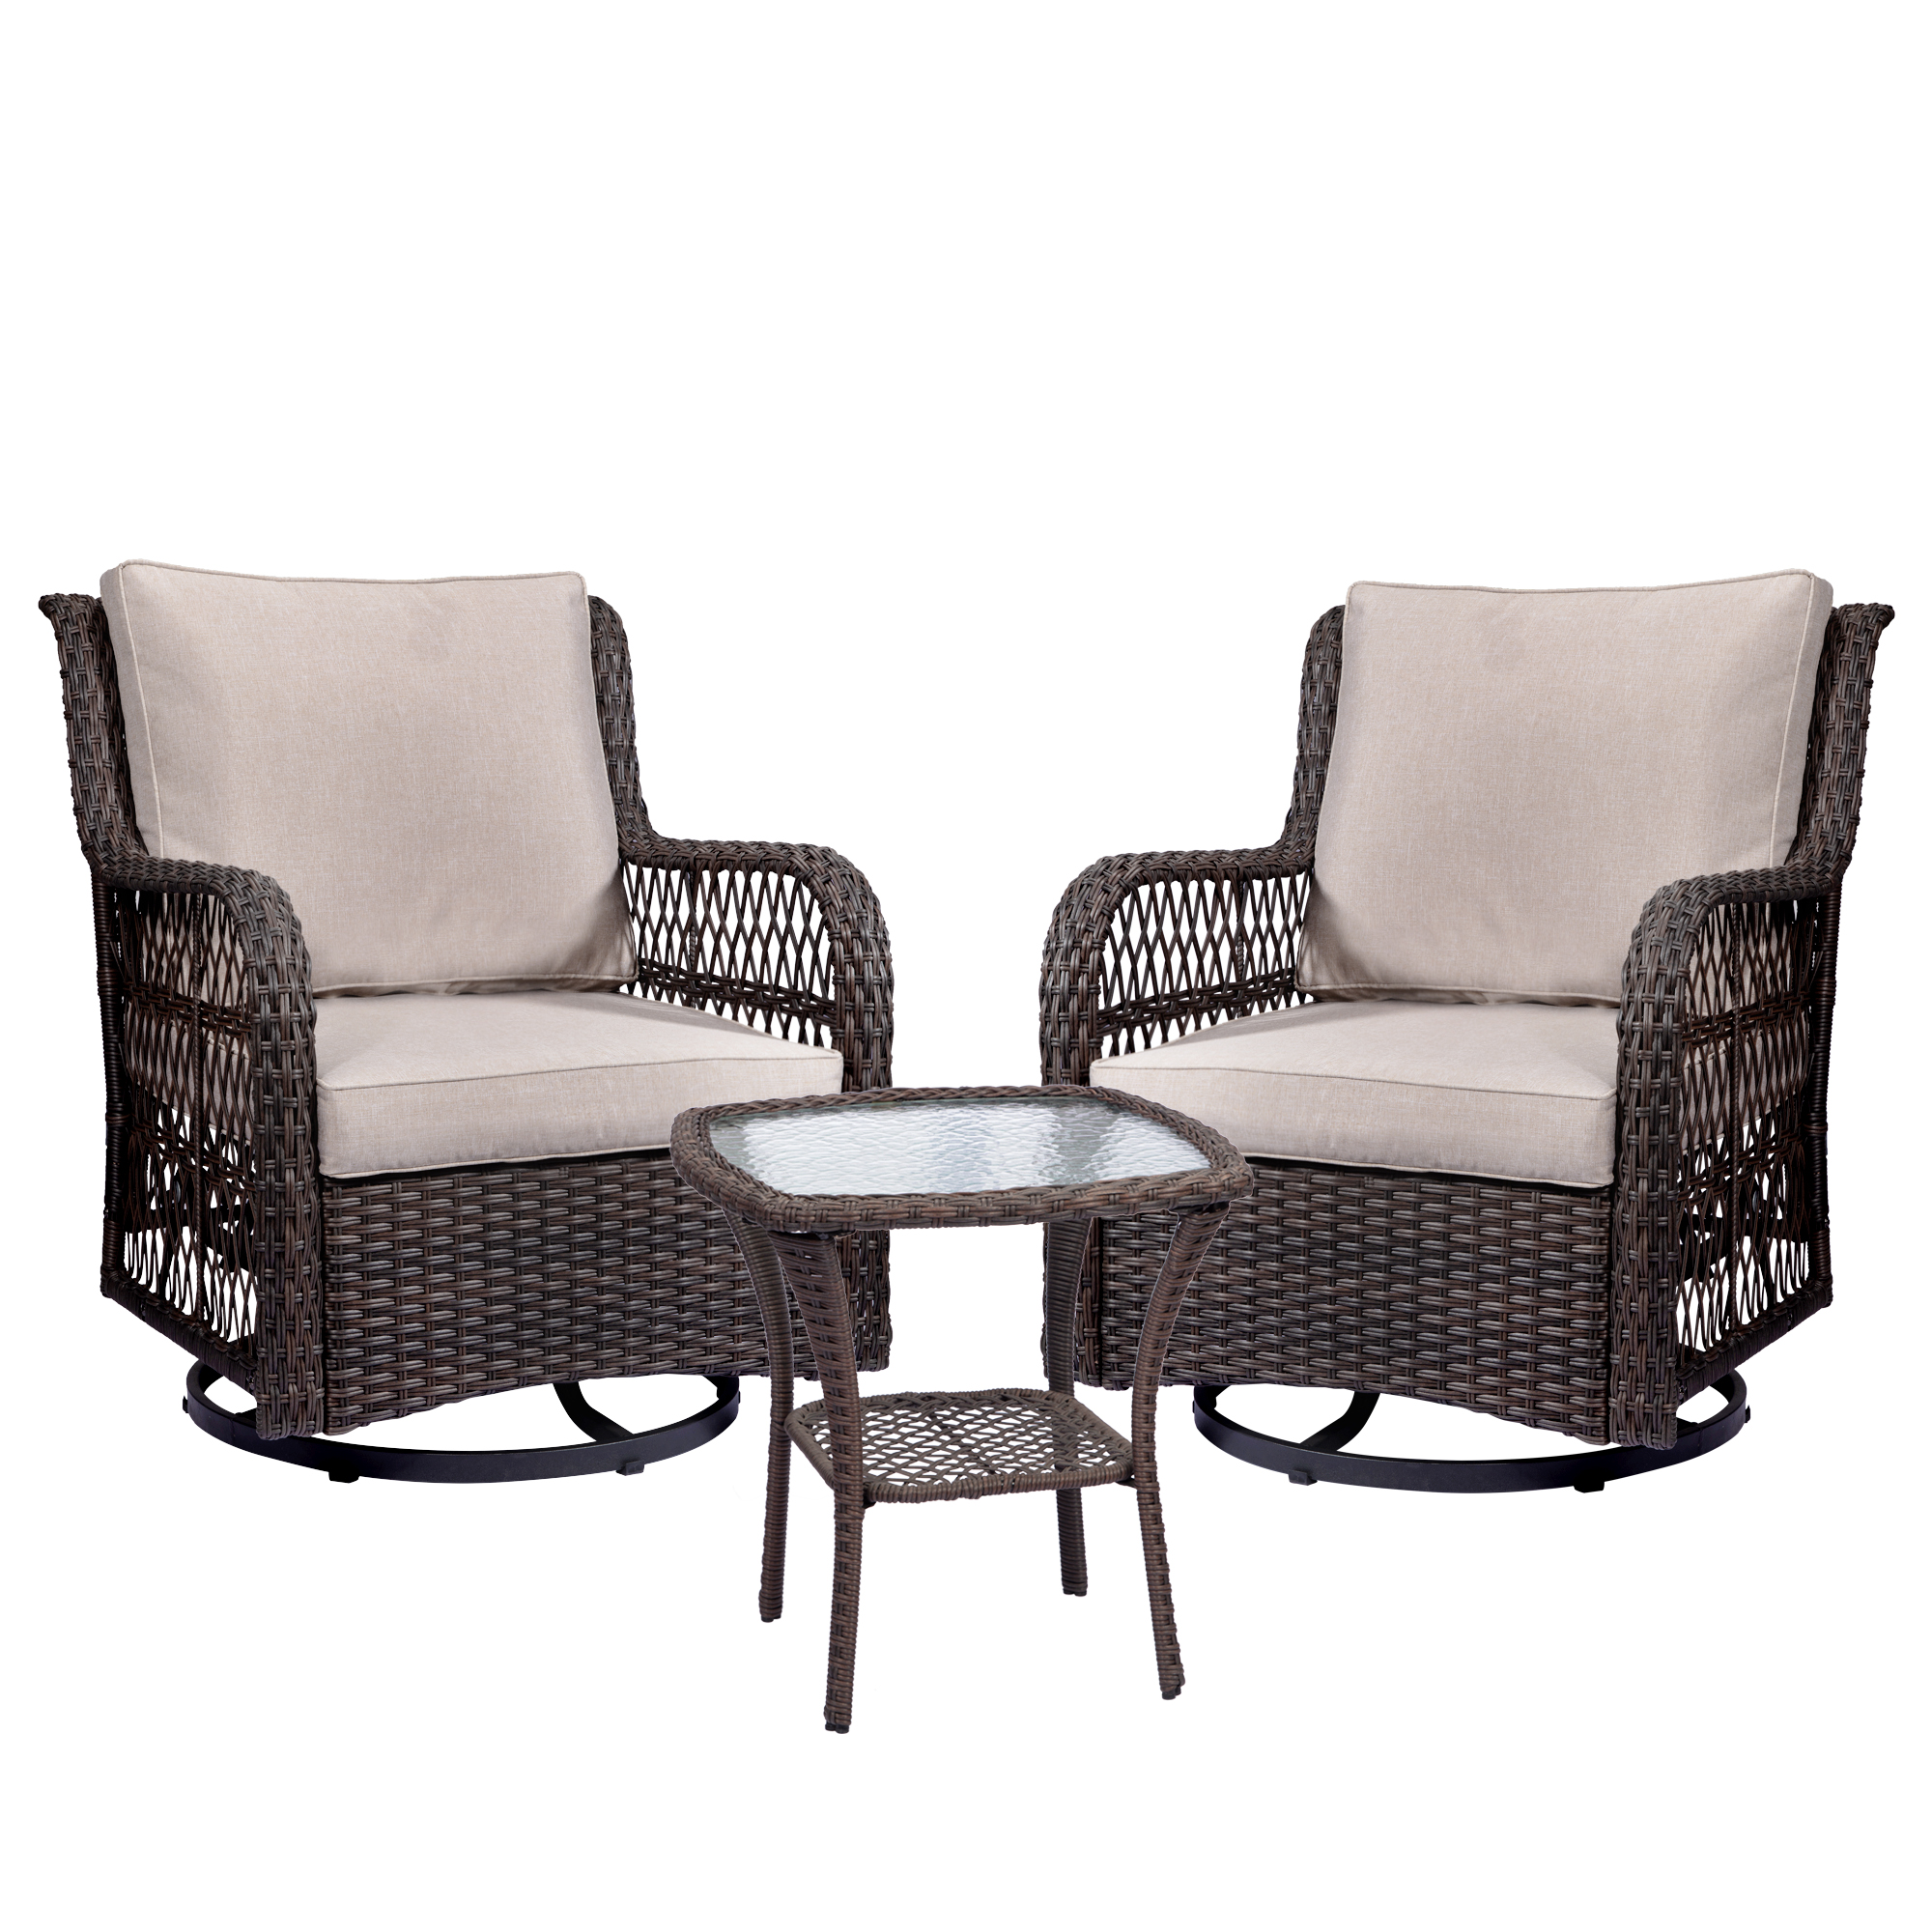 3 Pieces Outdoor Swivel Rocker Patio Chairs Set with Cushion,2PCS 360° Swivel Rocking Patio Chairs and 1PC Matching Side Table for Outside Backyard Garden Beige - image 1 of 7